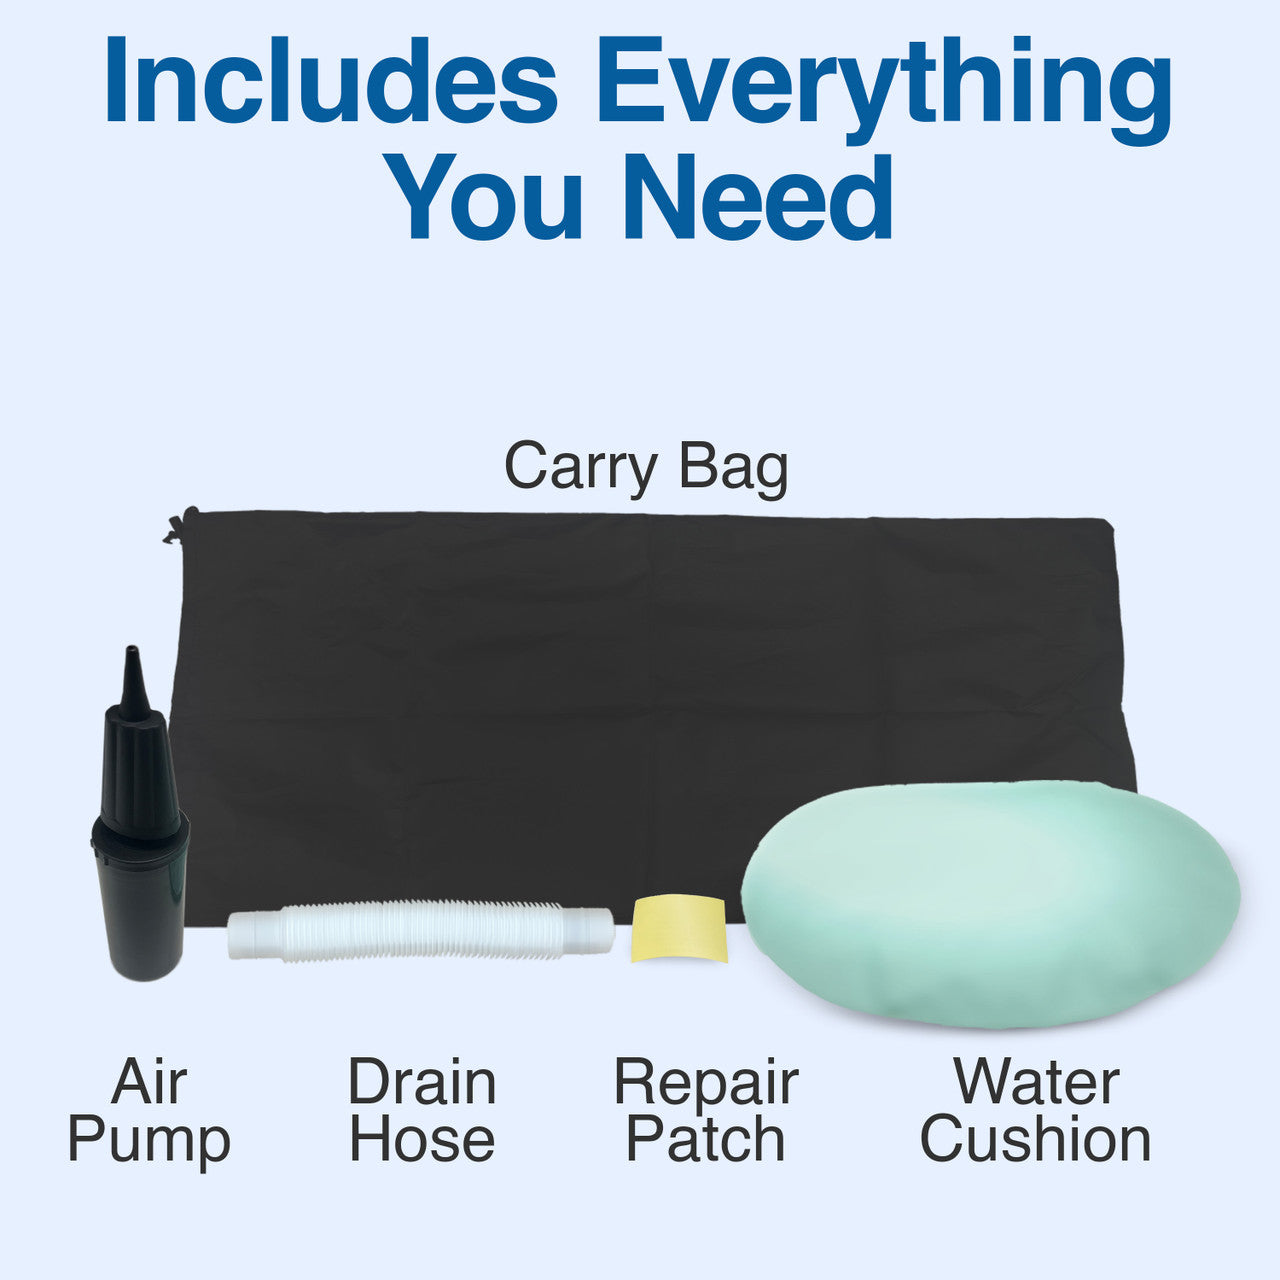 Portable Ice Bath with Cover and Carry Bag